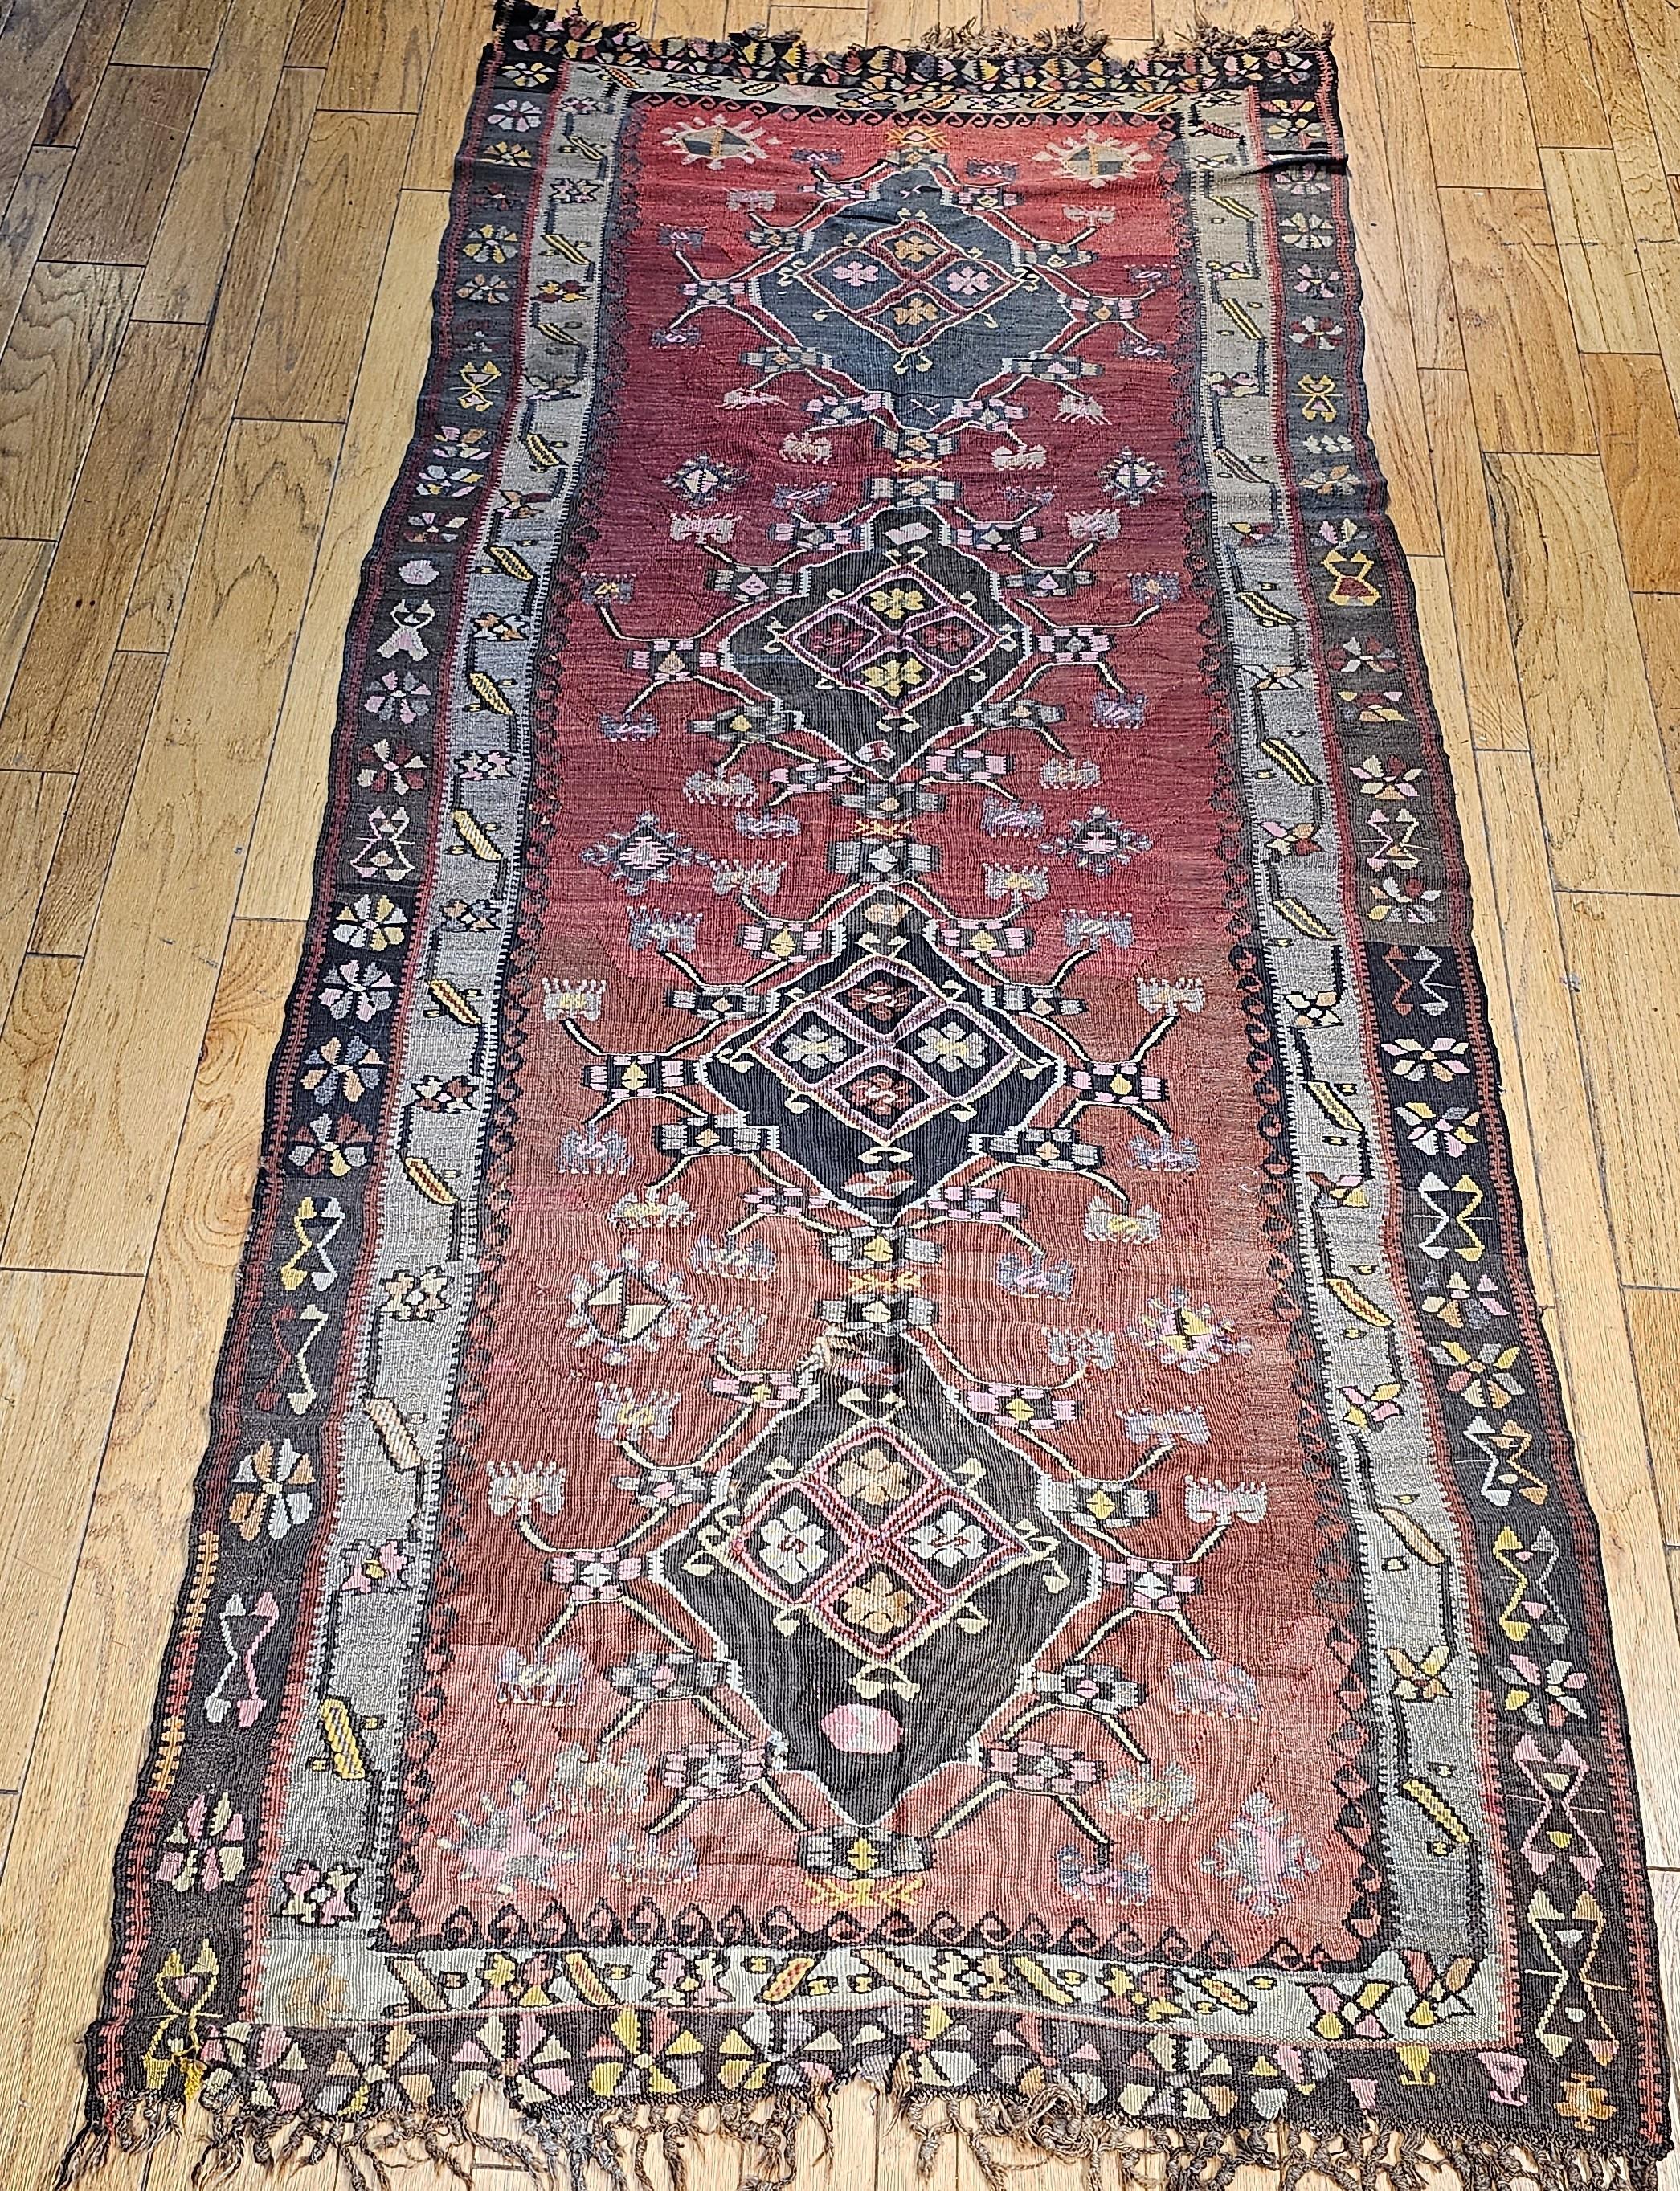 Beautiful vintage Turkish kilim from Eastern Turkey in a multiple medallion pattern from the early 1900s. This Turkish Kilim has four-diamond shaped medallions in a column in the center of the kilim.  The beautiful design is enhanced by the abrash